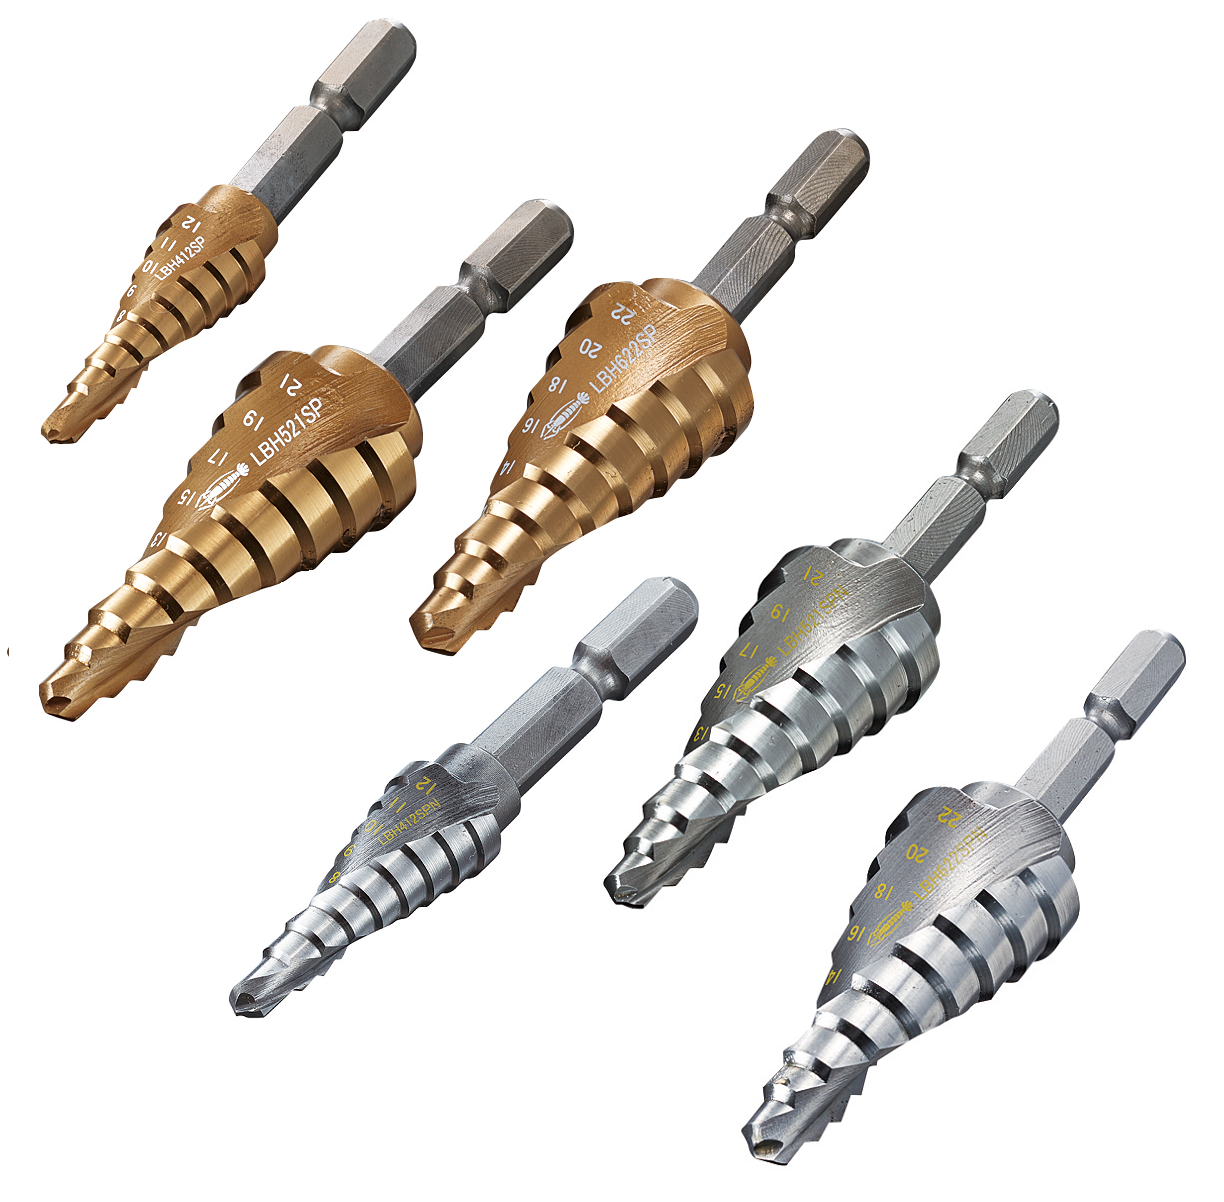 Step drill bit, Spiral stage drill LBHSP(N) (Hexagon shaft)(Non-coated type/TiN-coated type)